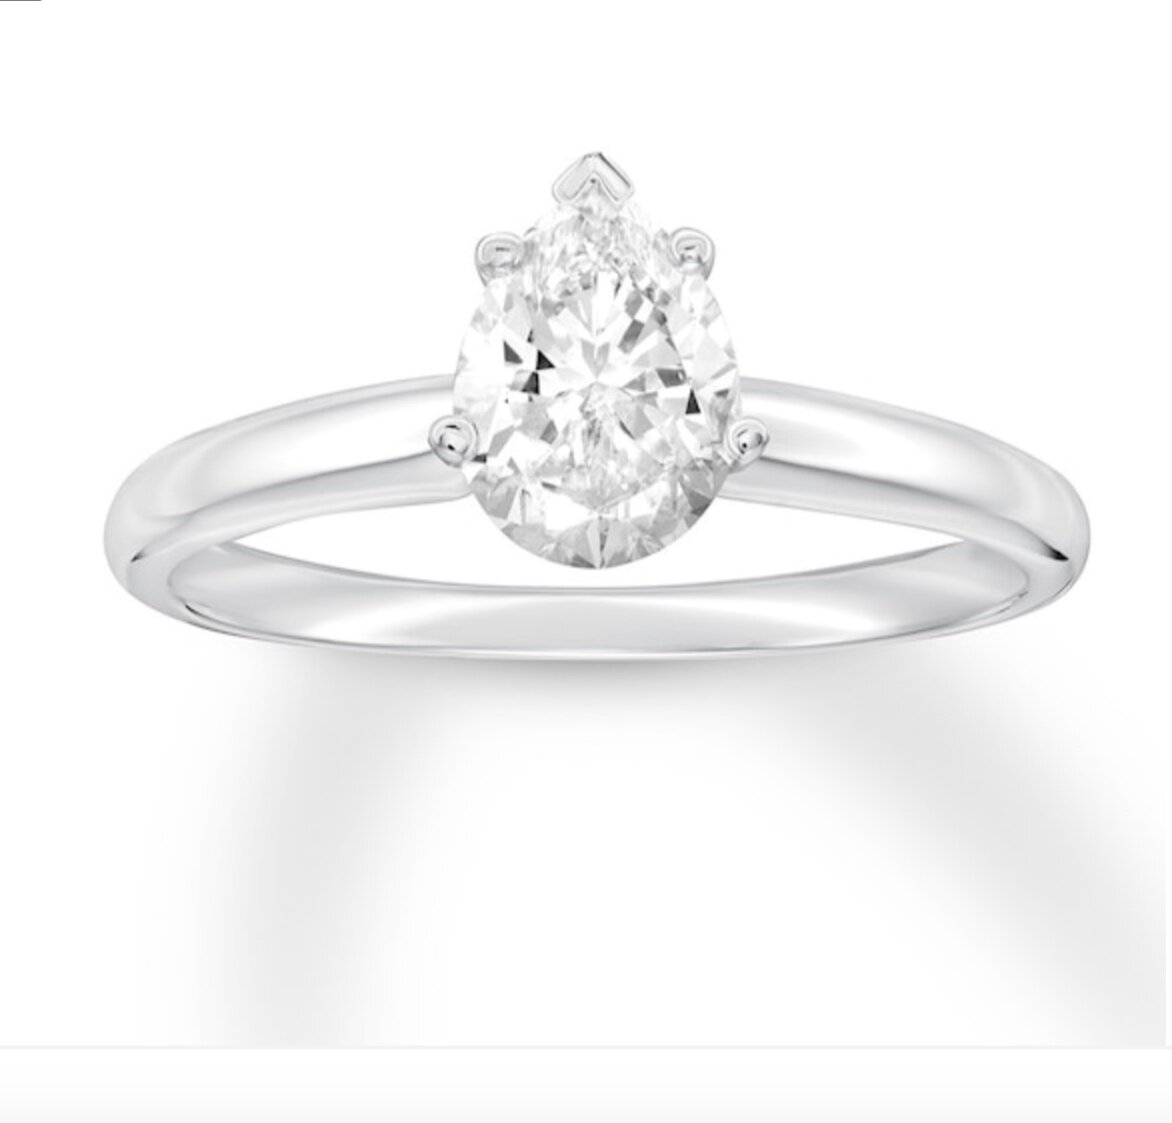 Pear-shaped 14K White Gold